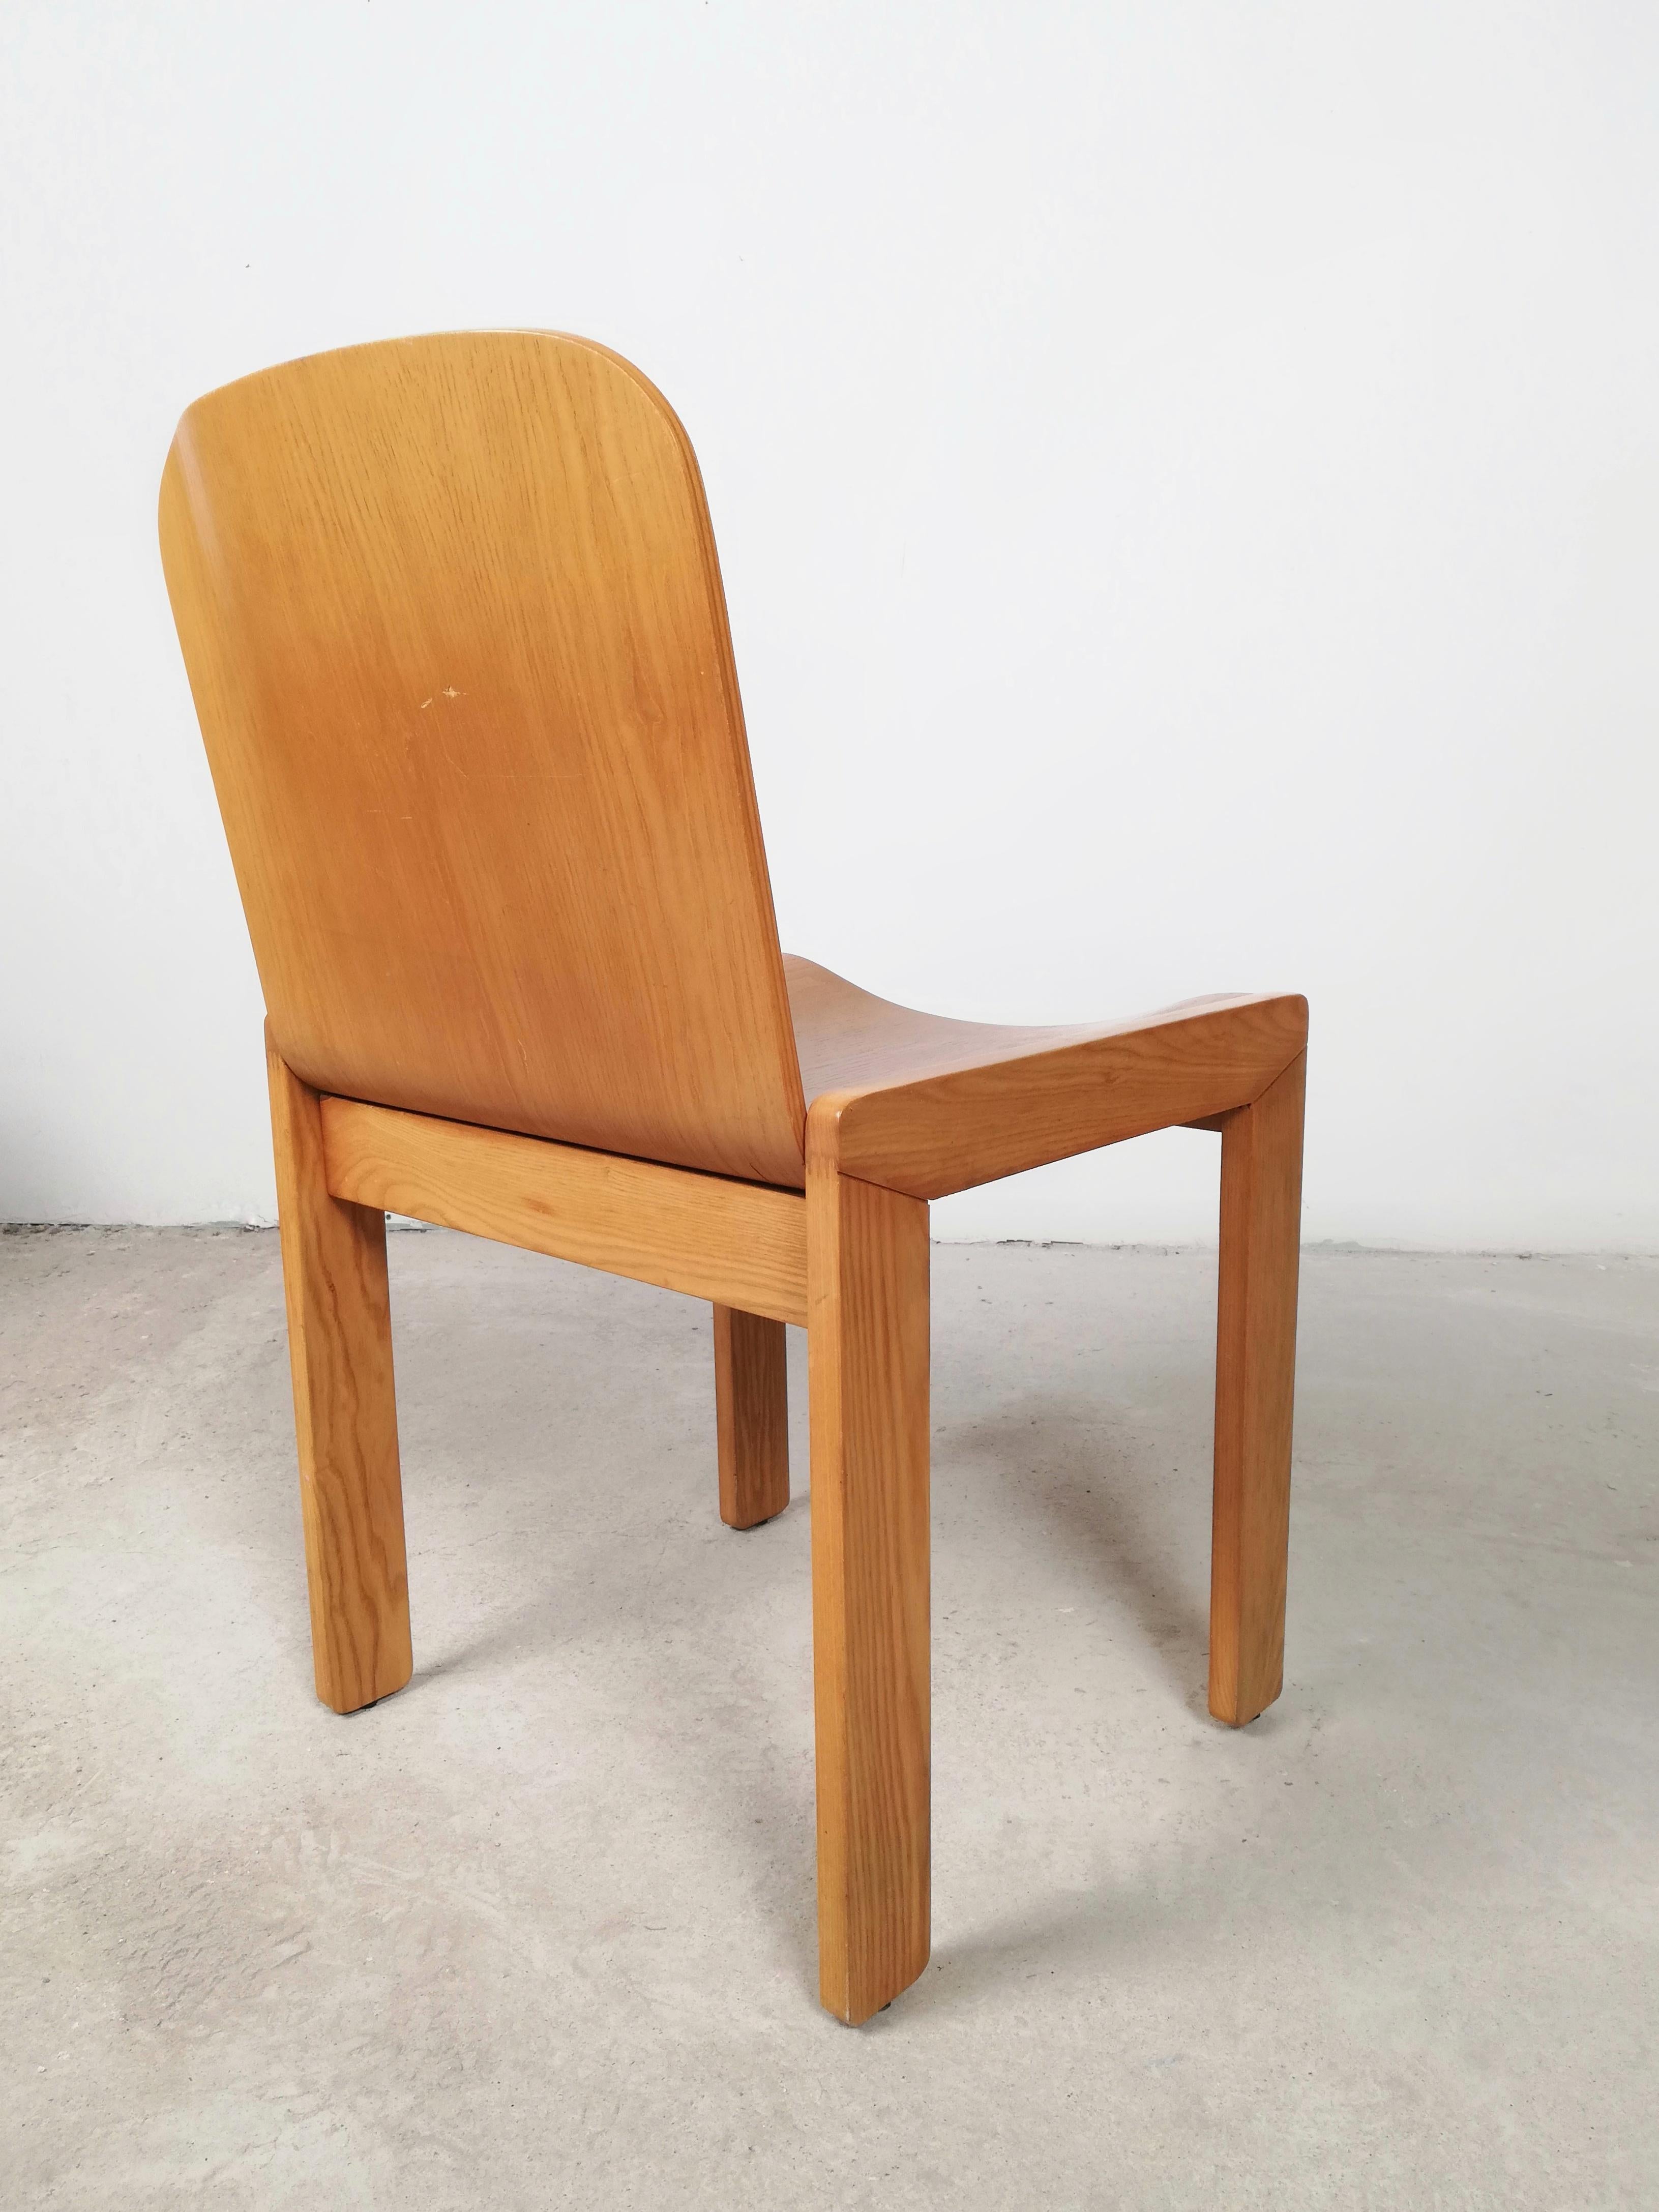 6 Curved Plywood Dining Chairs by Molteni in the style of Scarpa, Italy, 1970s For Sale 12